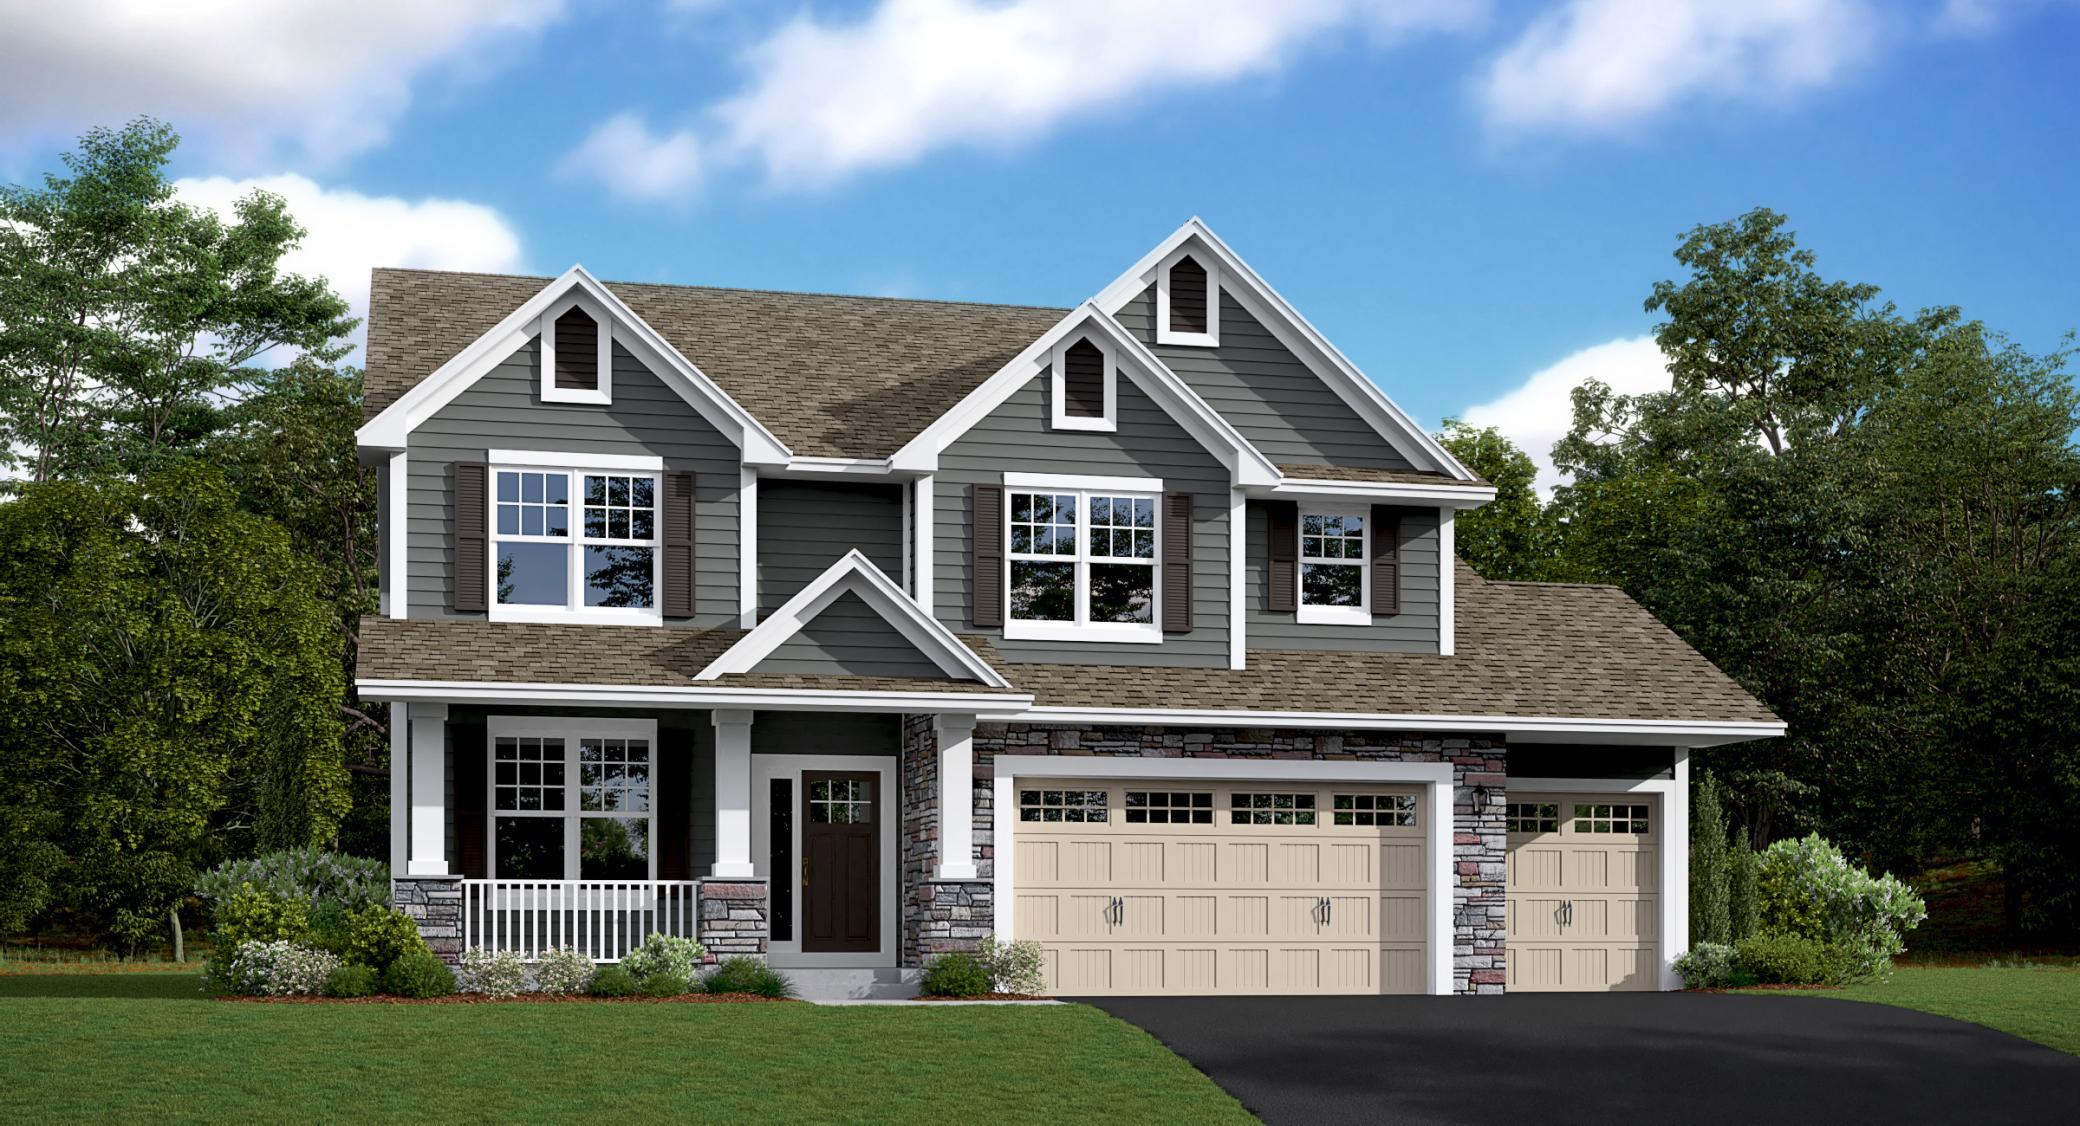 (Exterior rendering, actual homes finishes will vary) Welcome home to Reserve at Autumn Woods - 3091 Sugar Maple Drive - WASHBURN floorplan with WALKOUT unfinished lower level! Available for an October closing!